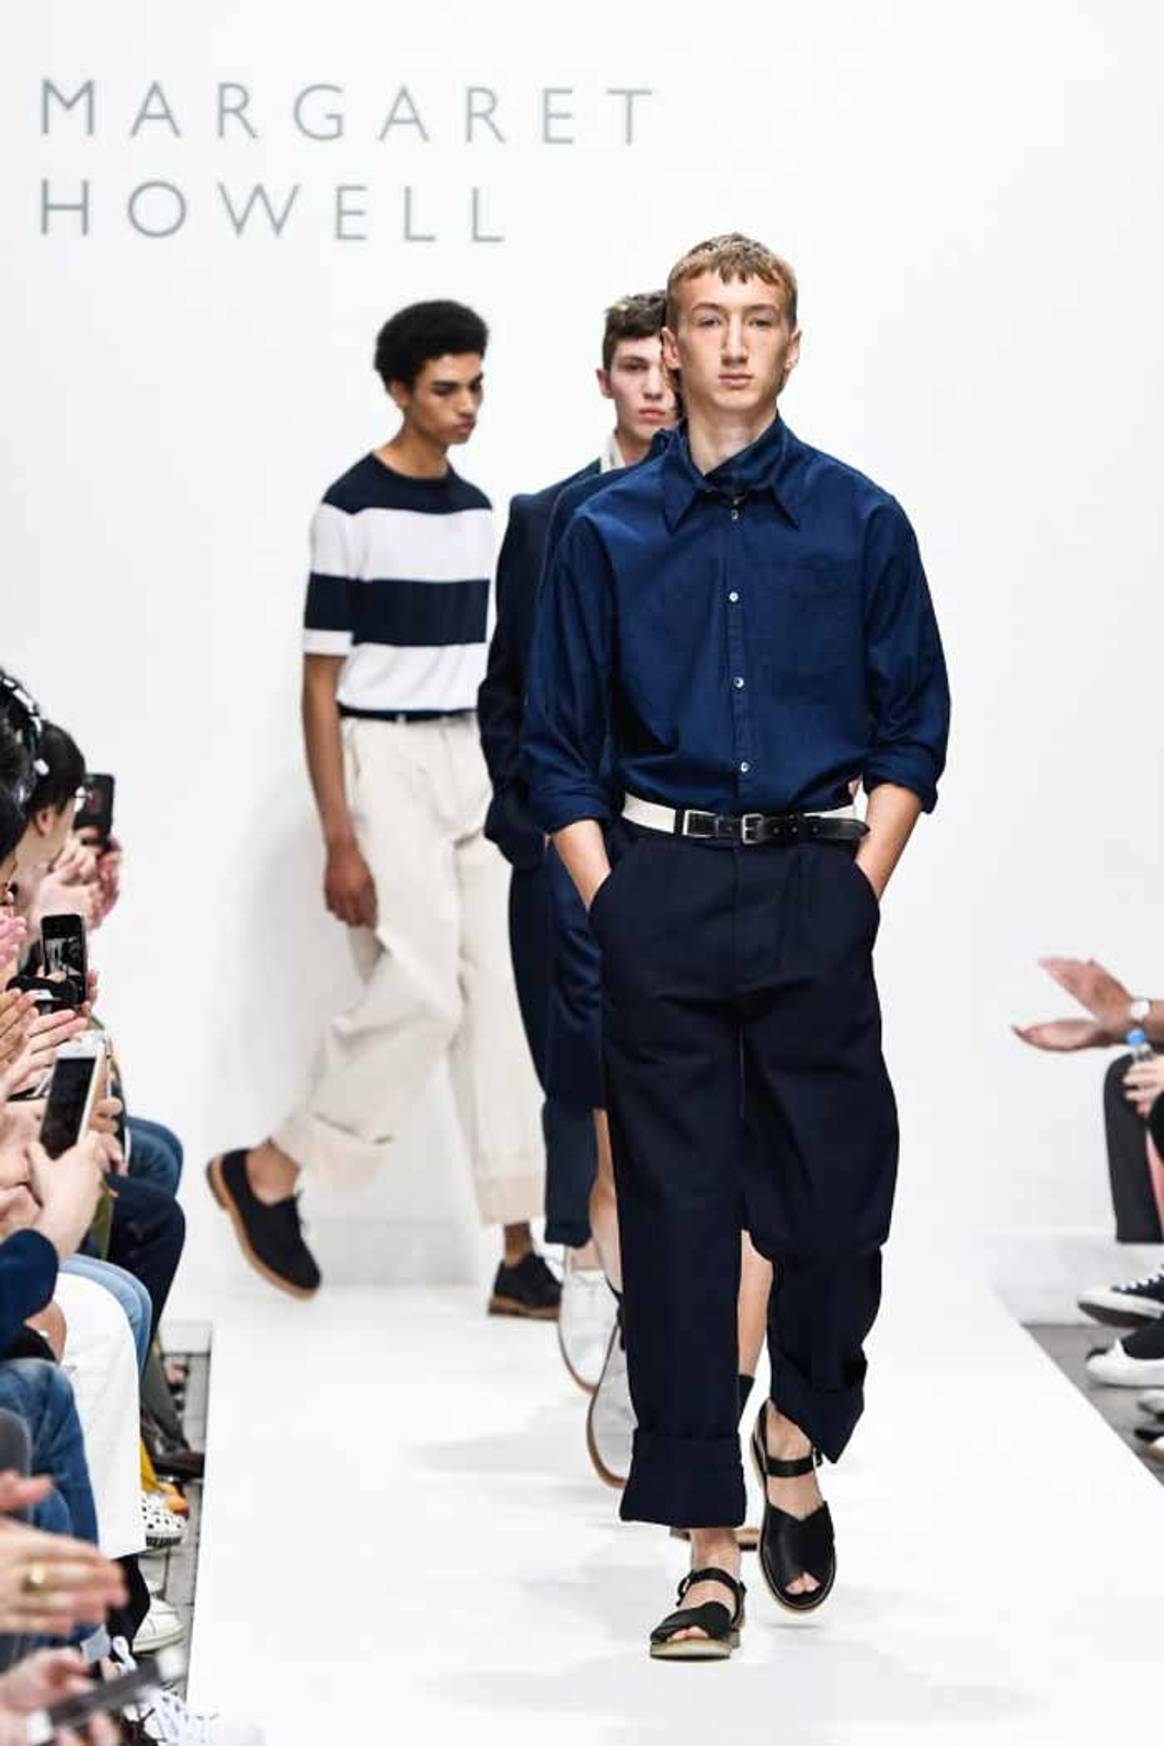 What does the future hold for Men's fashion weeks?